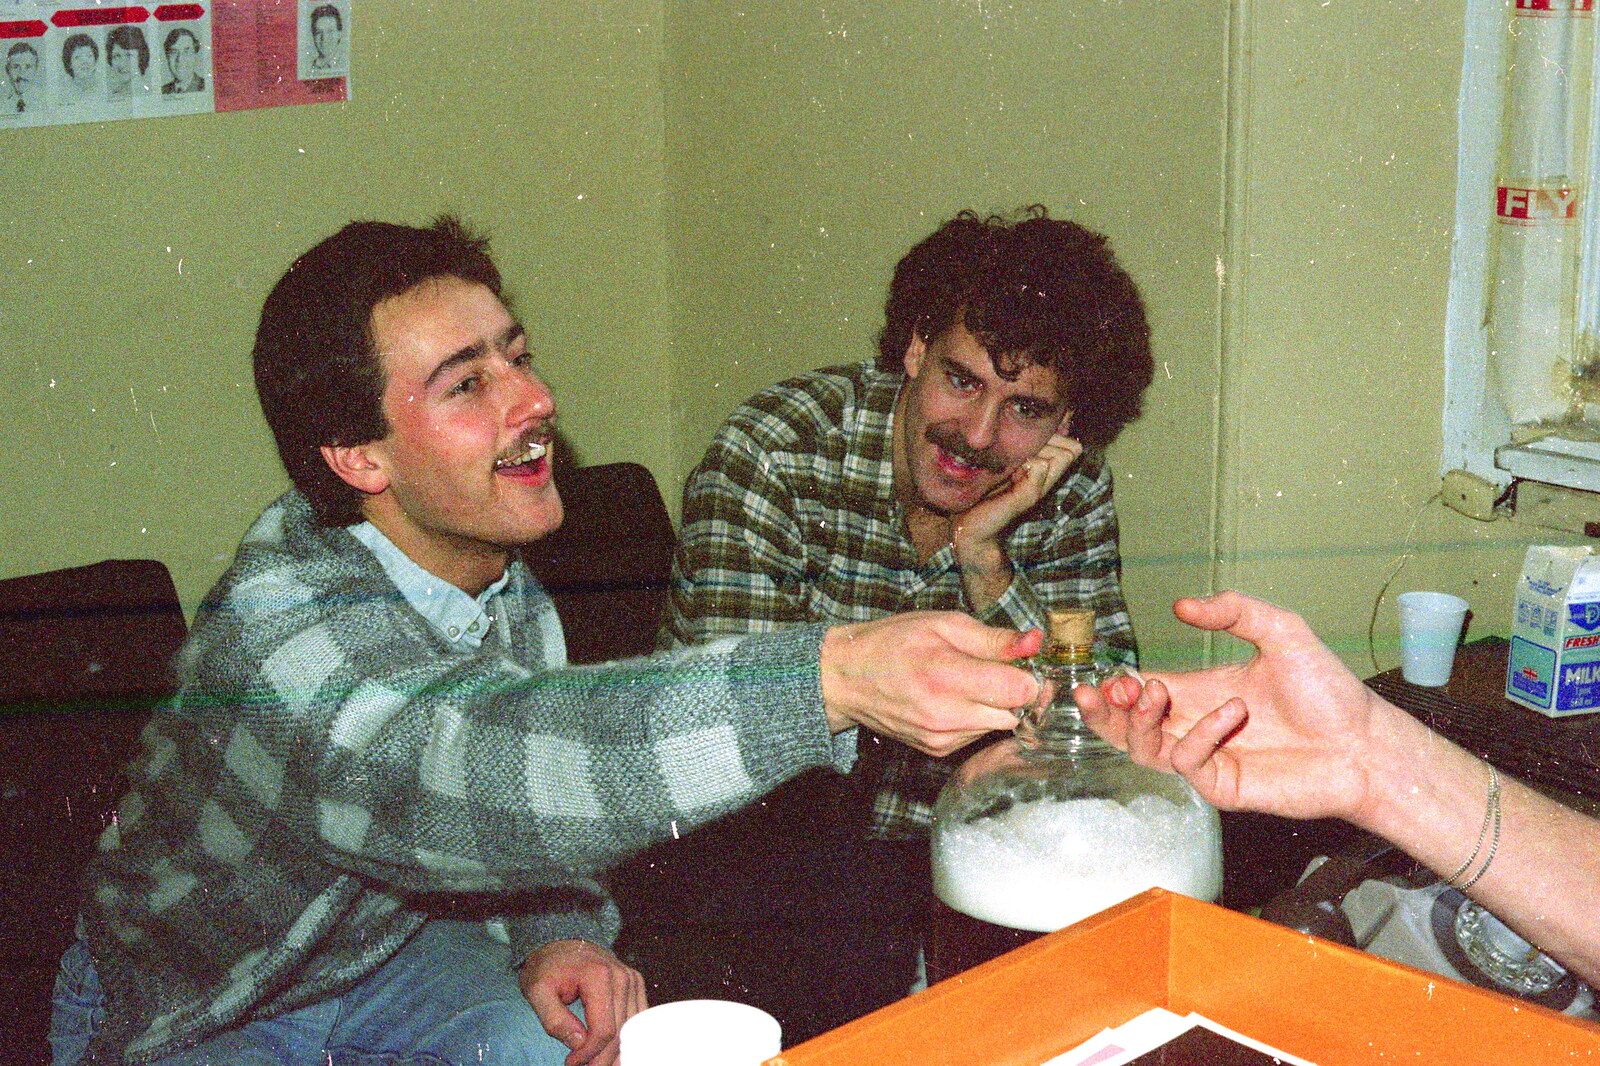 Mark passes over a demijohn of homebrew from Uni: The Fly Christmas Party and BABS Panto, Plymouth Polytechnic, Devon - December 11th 1985